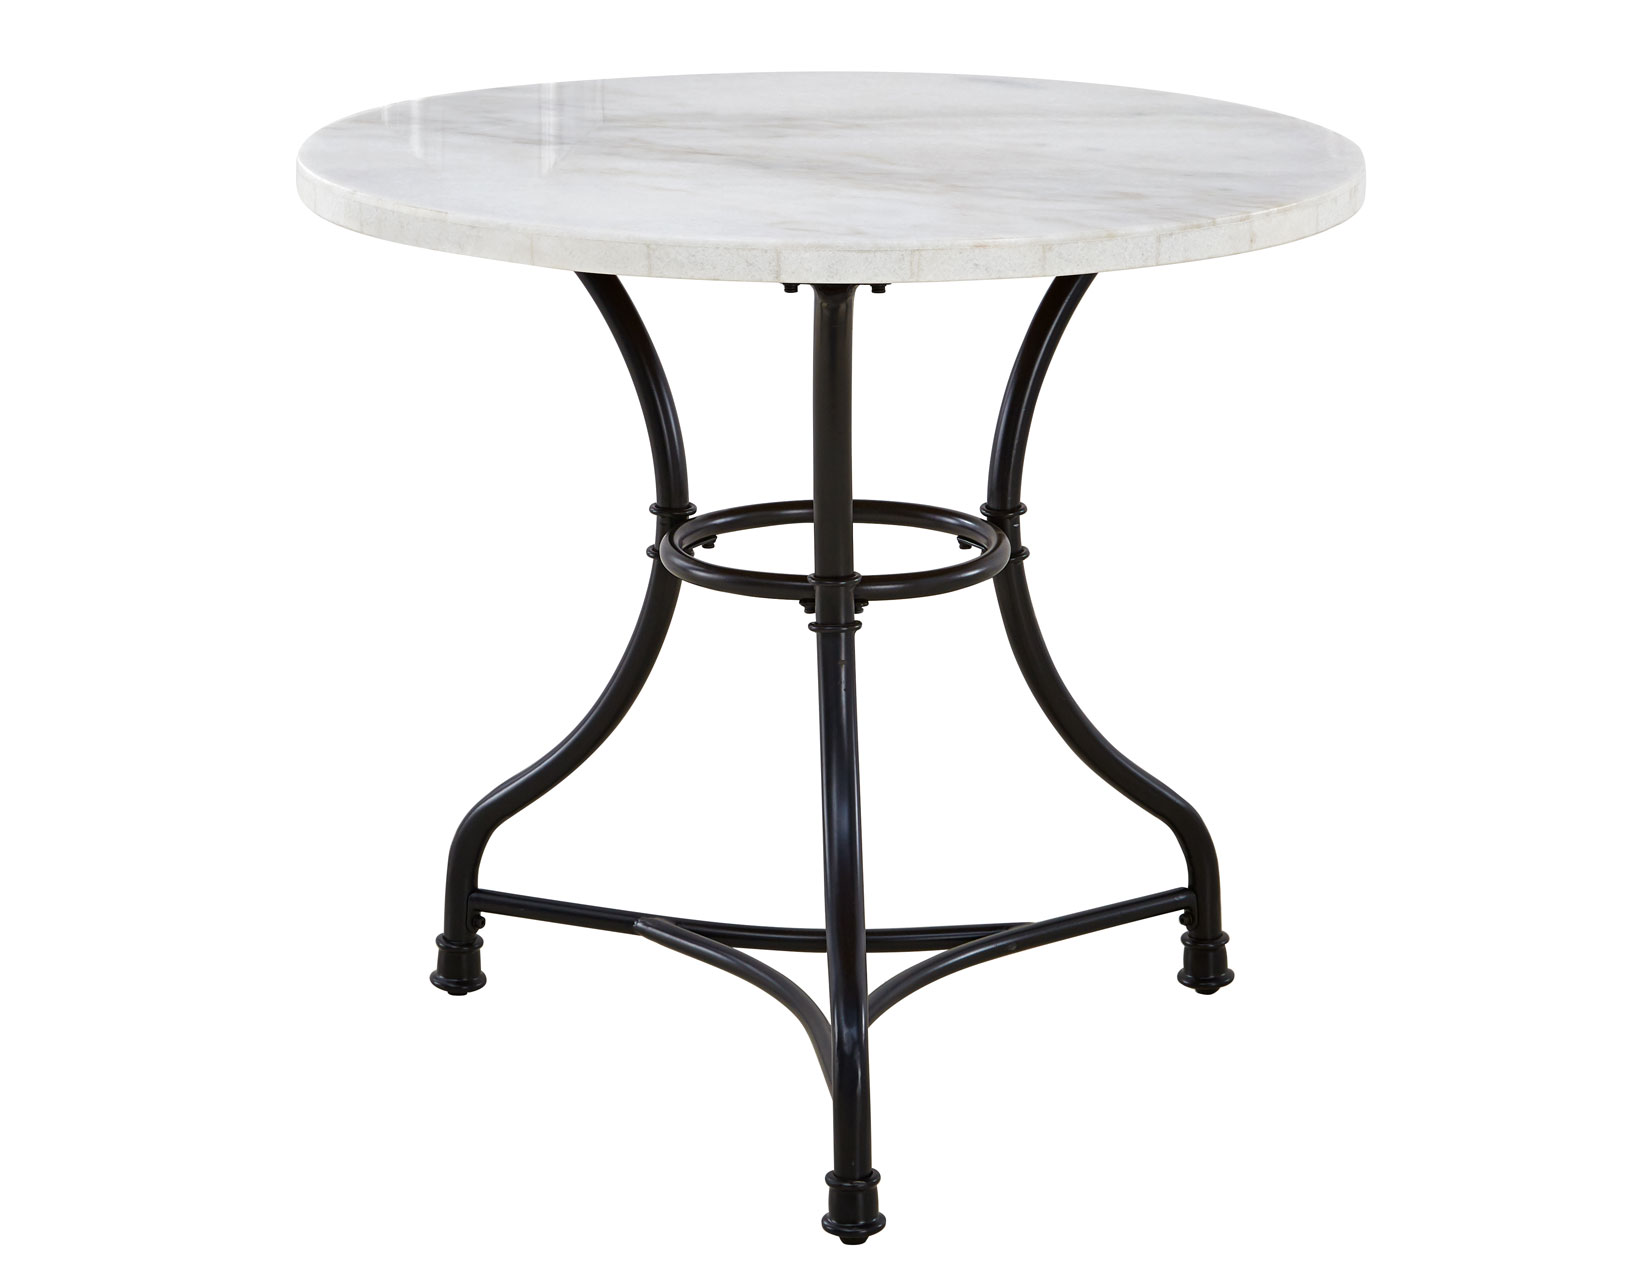 Claire 34 inch Round White Marble Top Bistro Table - DFW